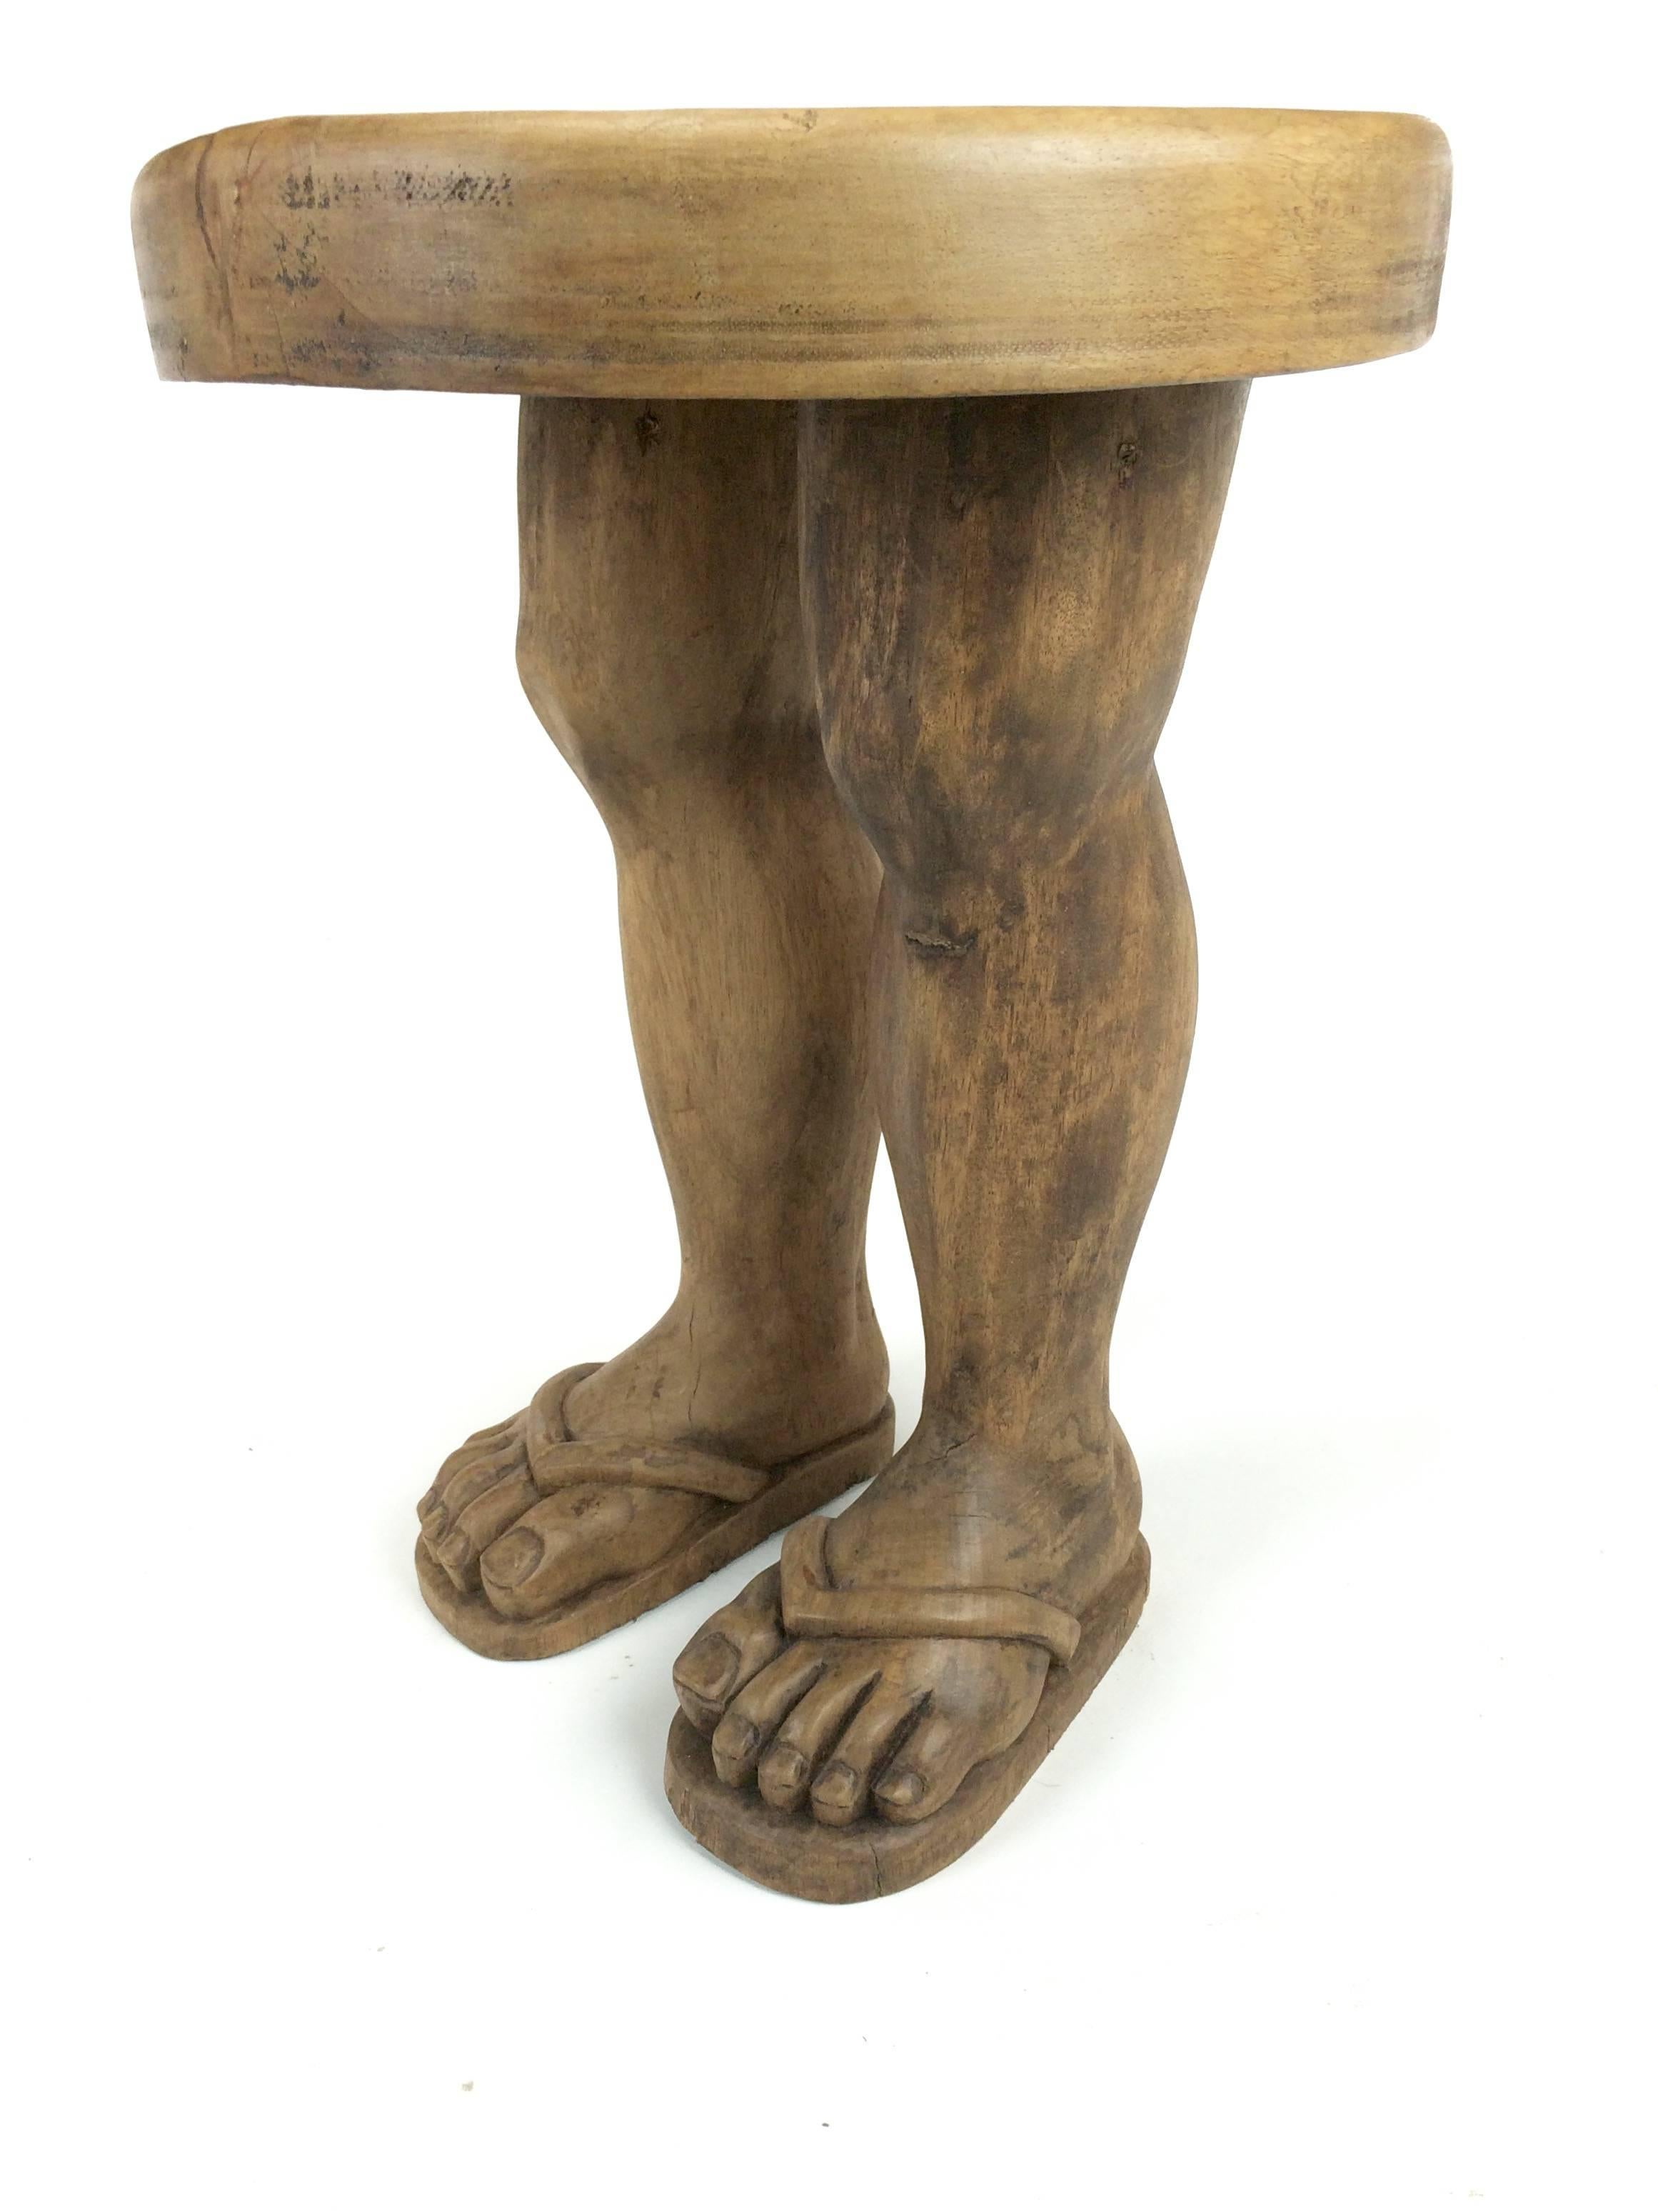 Hand-carved solid wood Folk Art stool in the shape of two legs, sandaled feet and thick wood disc seat.